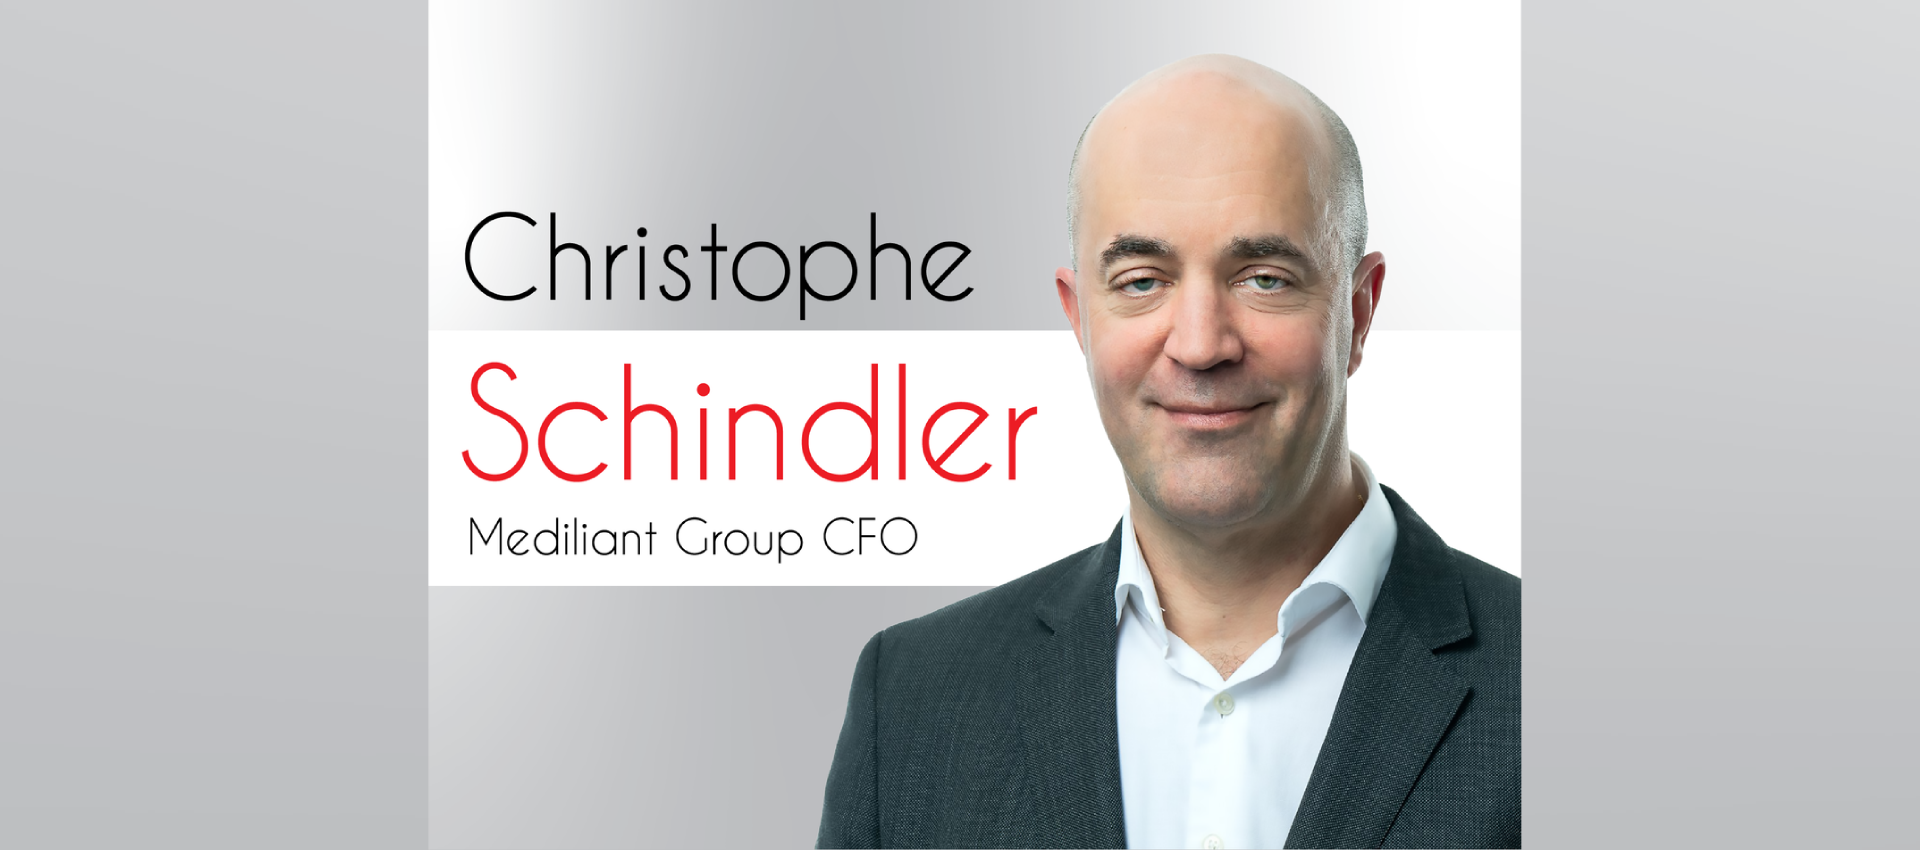 The addition of Christophe to the leadership team further enhances the Mediliant Group’s strategic growth plan.